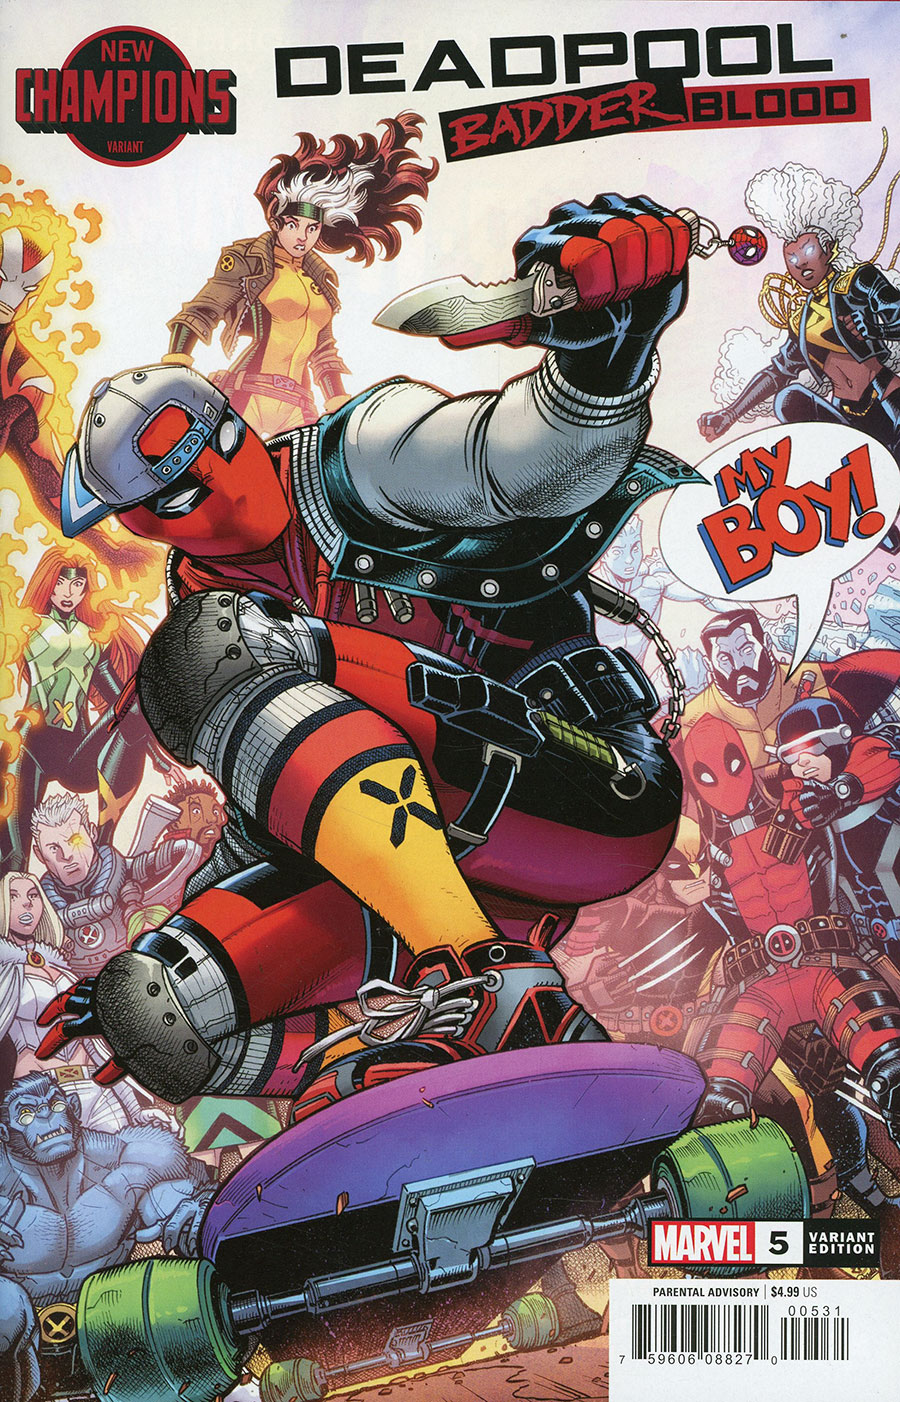 Deadpool Badder Blood #5 Cover C Variant Nick Bradshaw New Champions Cover